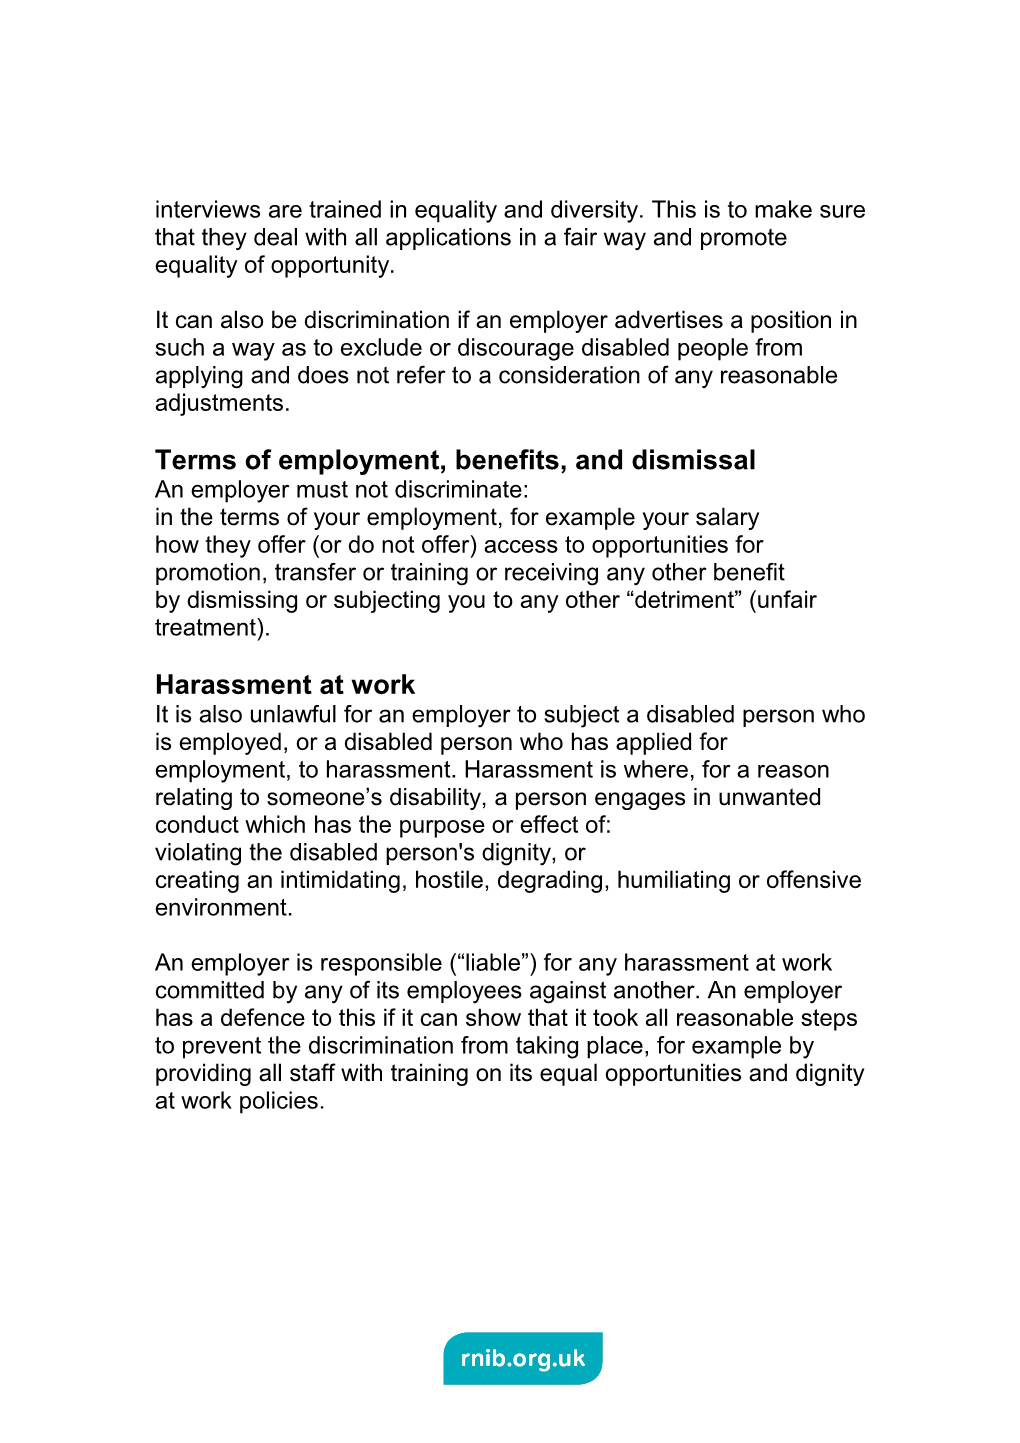 The Disability Discrimination Act 1995 Your Rights in Employment